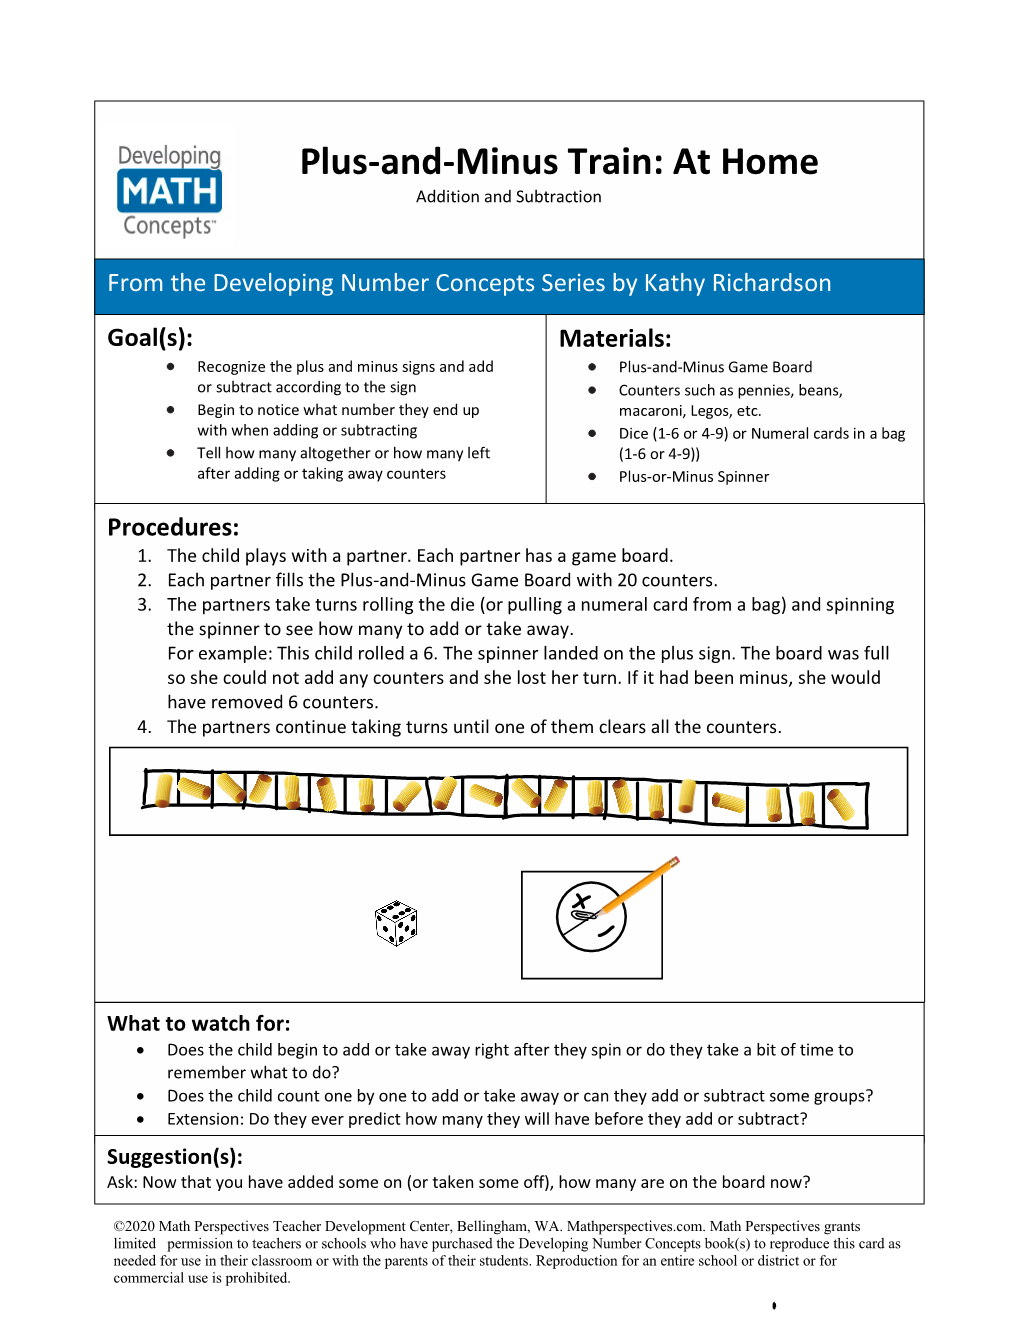 Plus-And-Minus Train: at Home Addition and Subtraction